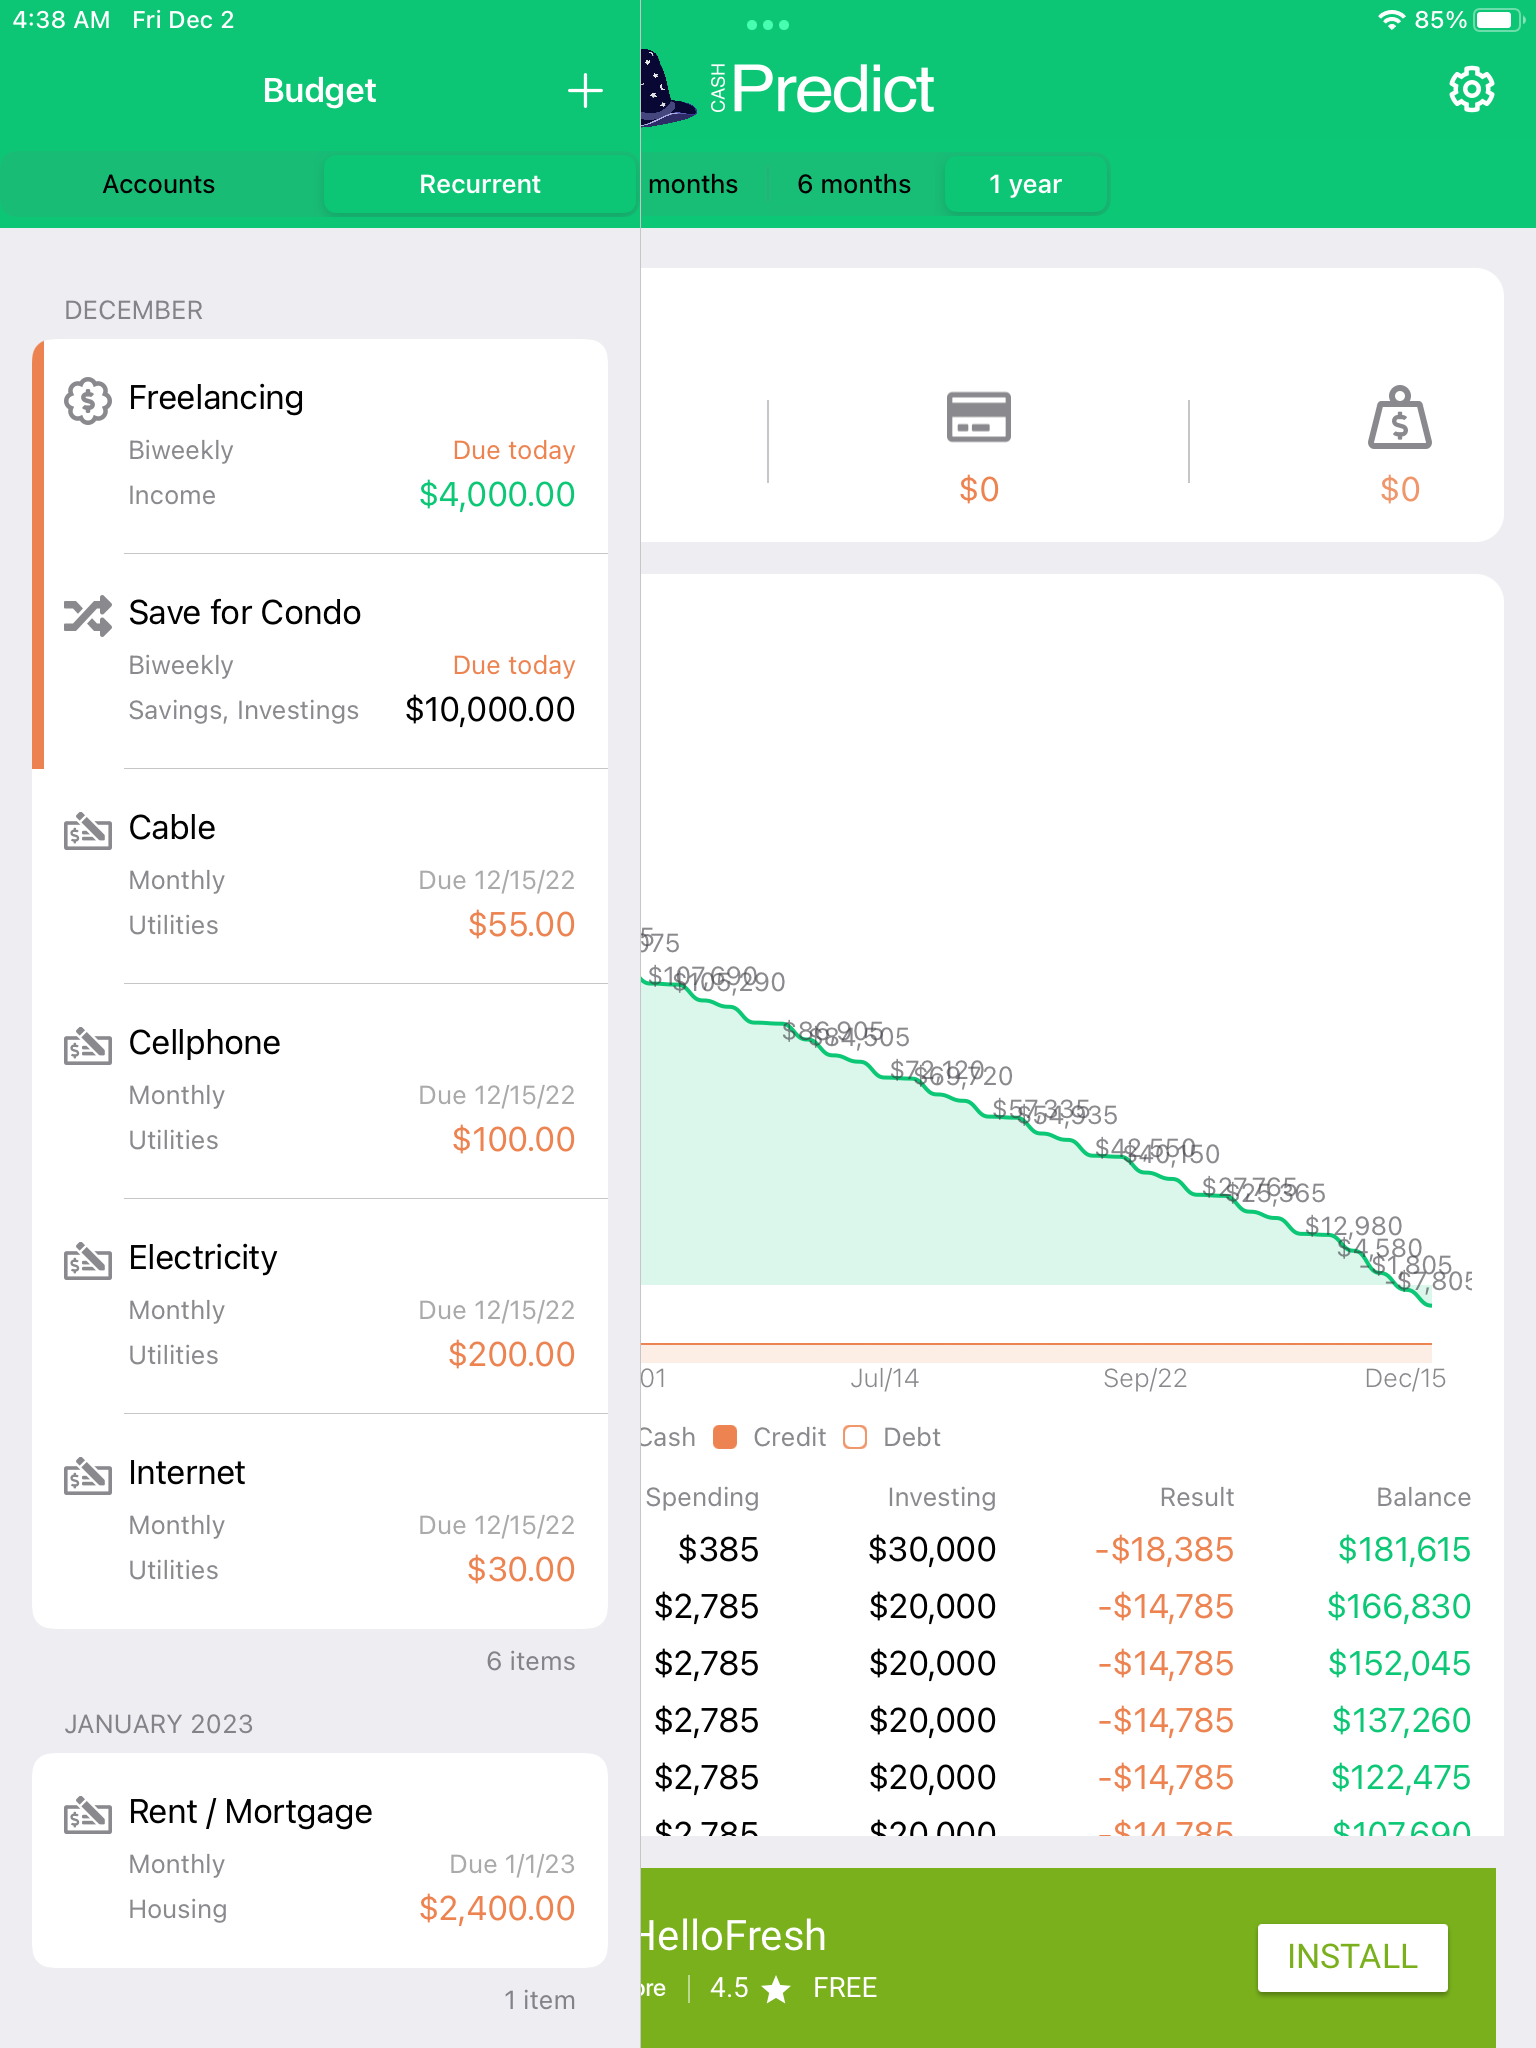 Cash Predict | Financial Projections | GiveMeApps